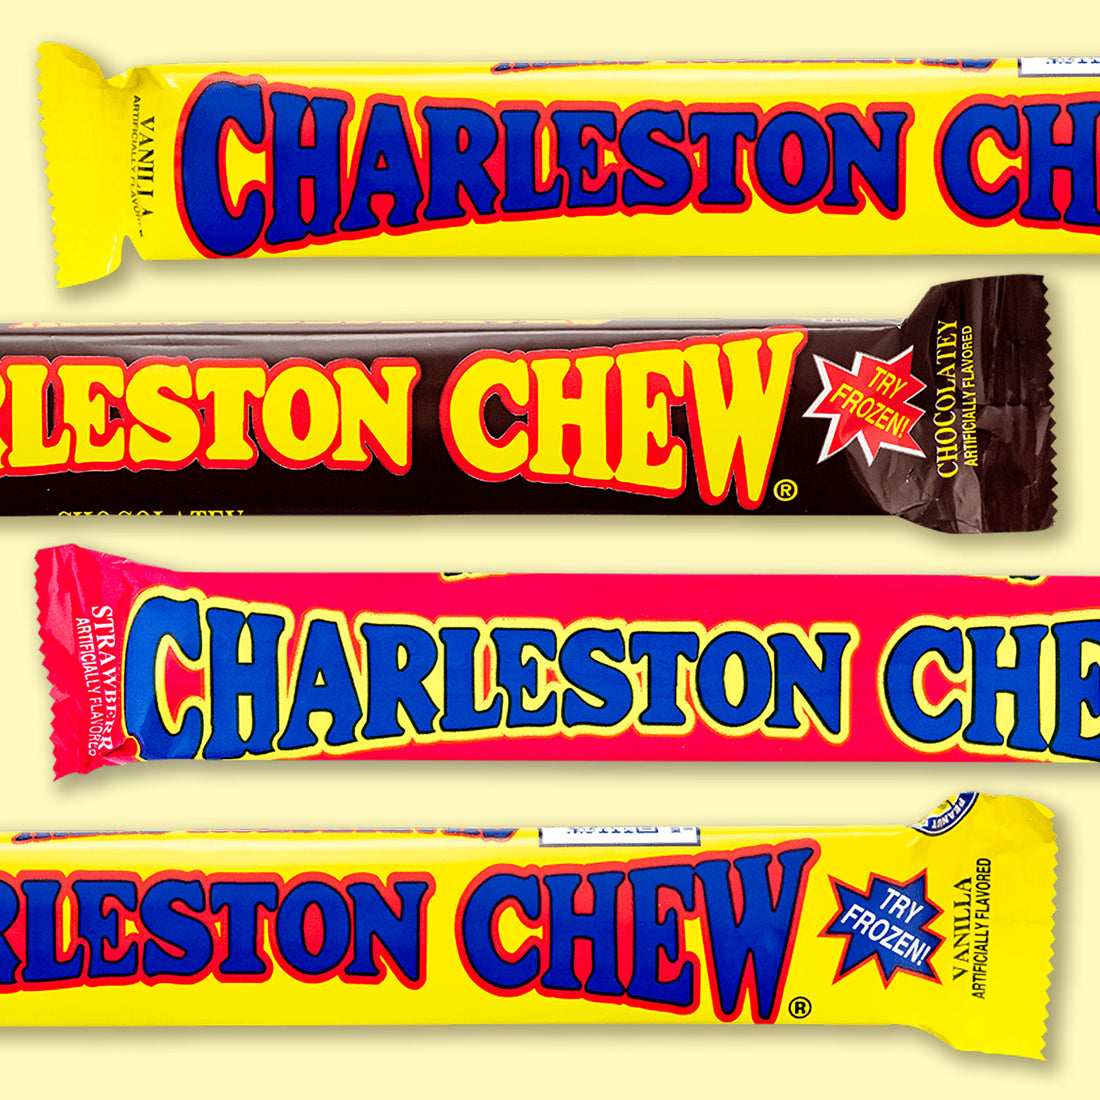 The Best Candy Bars Of All Time According To A Retro Candy Company